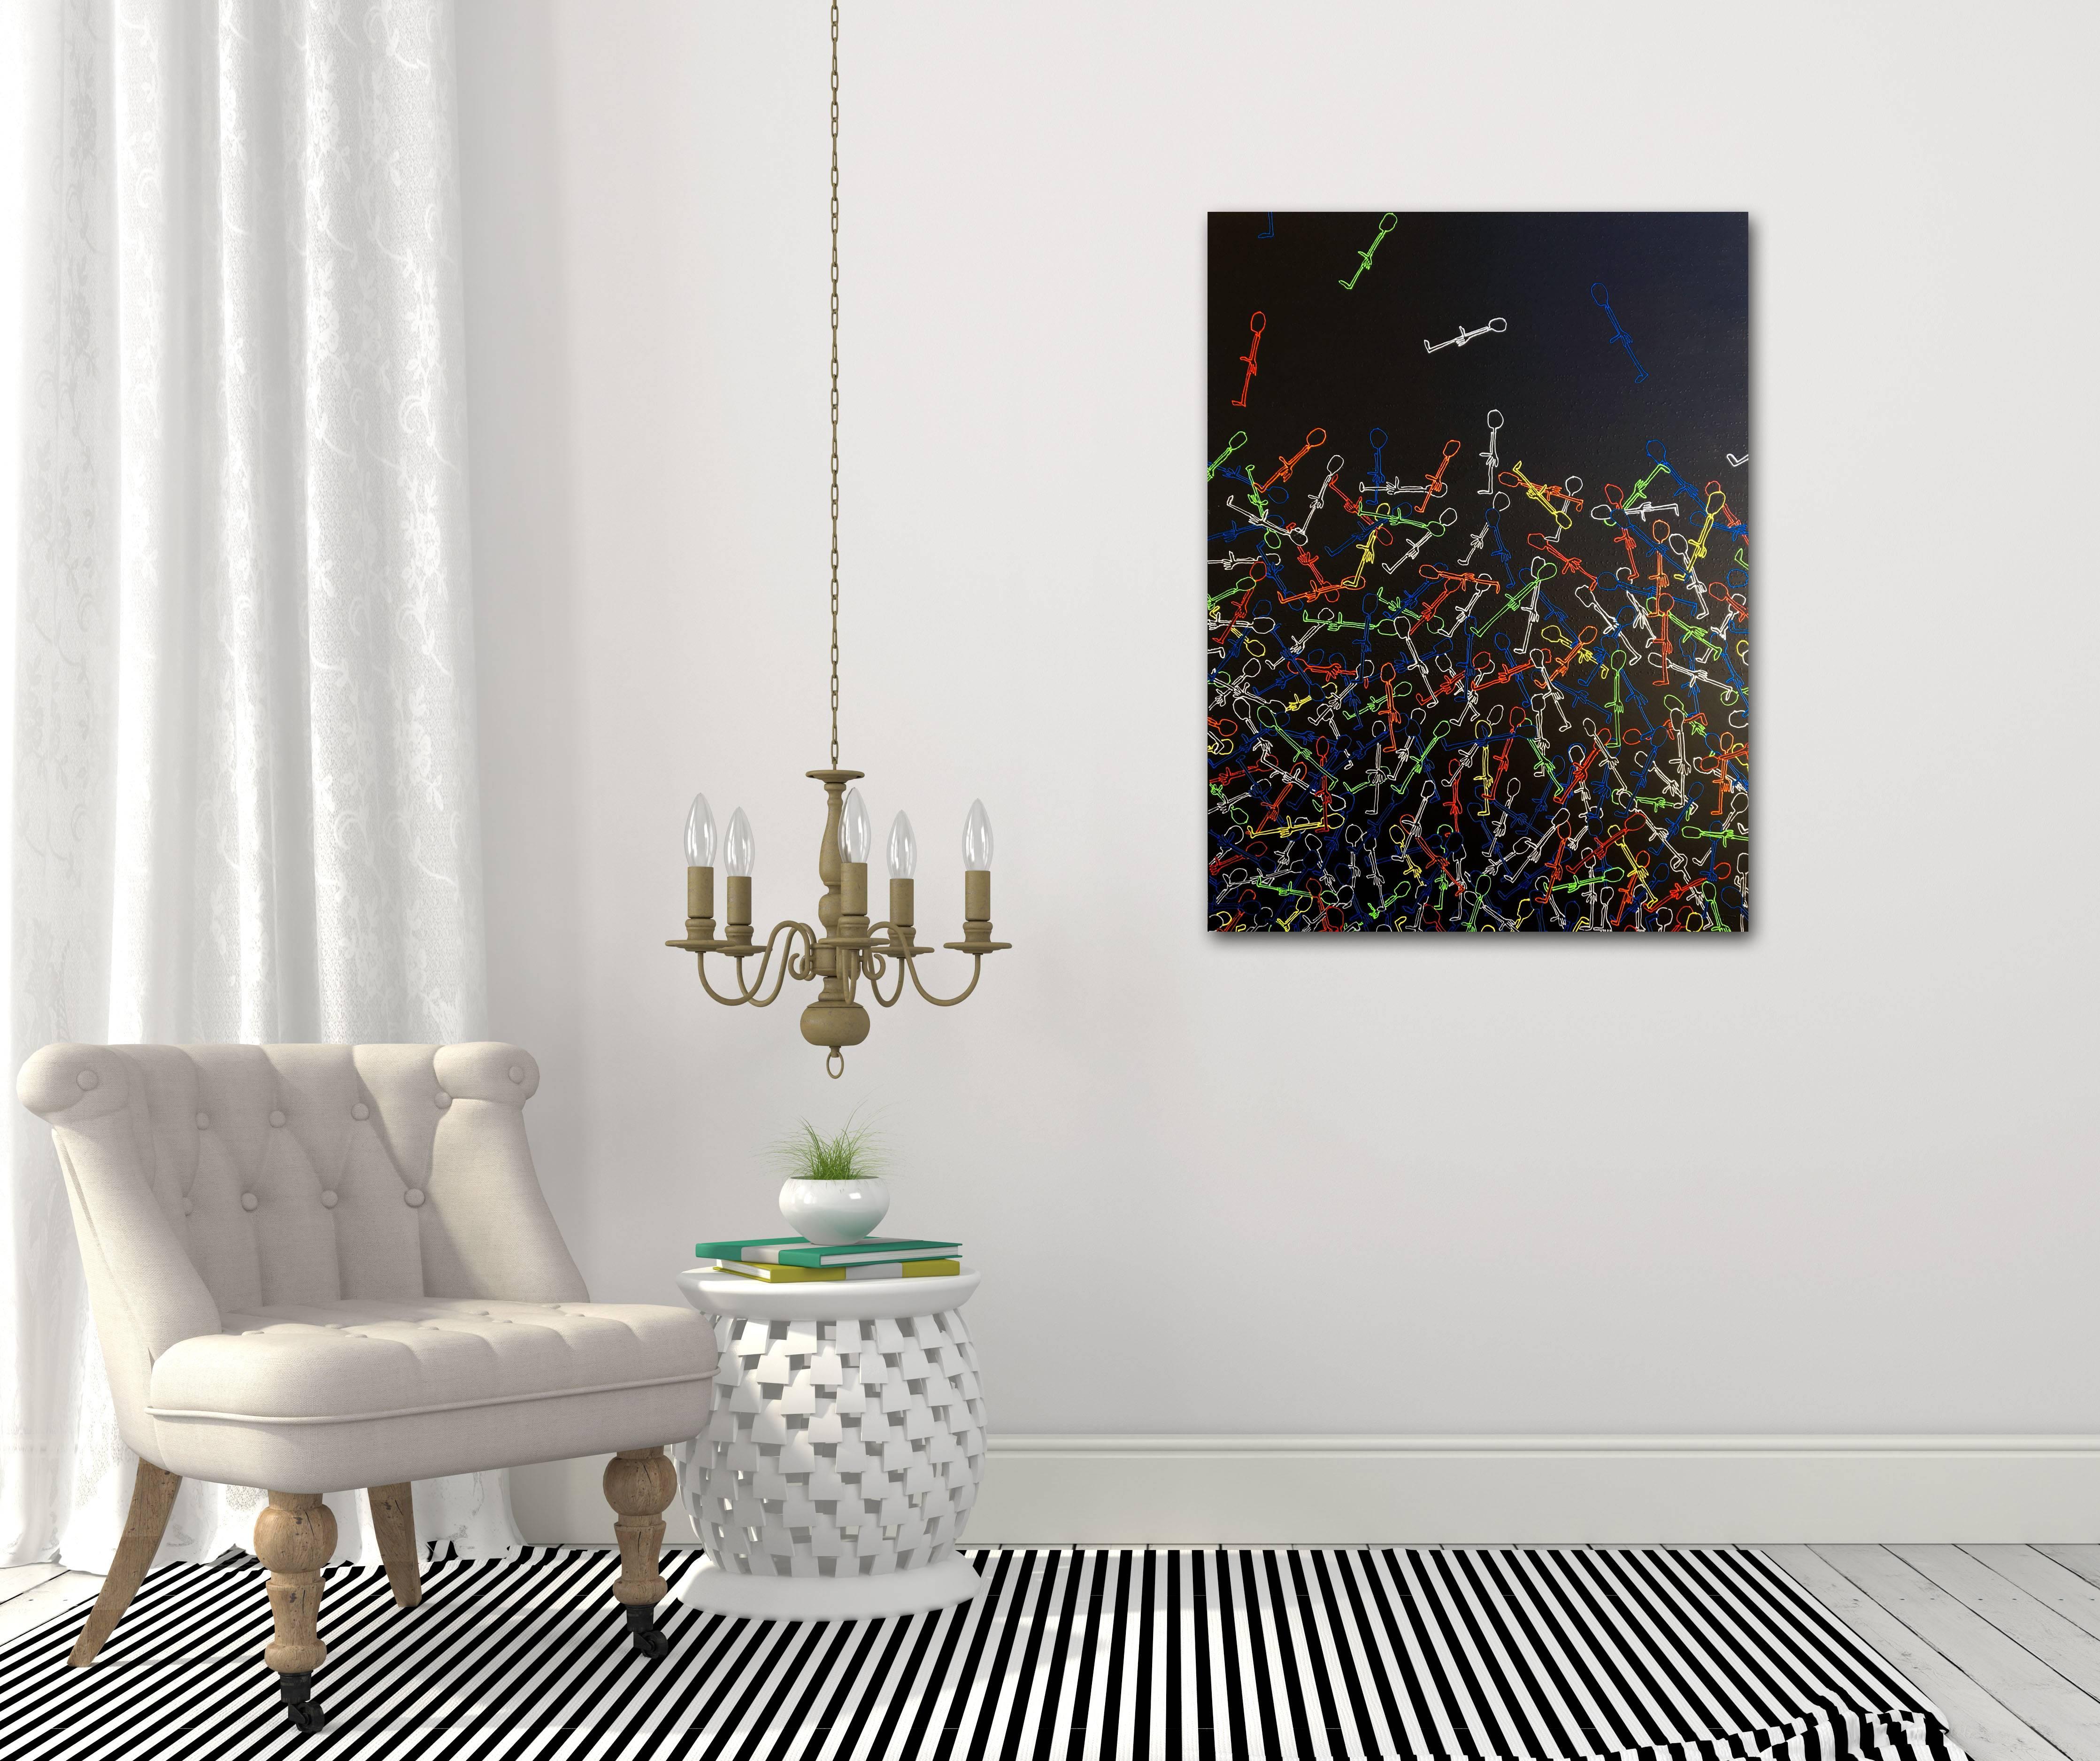 A Different Crowd II - Original Colorful Artwork on Canvas - Black Abstract Painting by Ricky Hunt